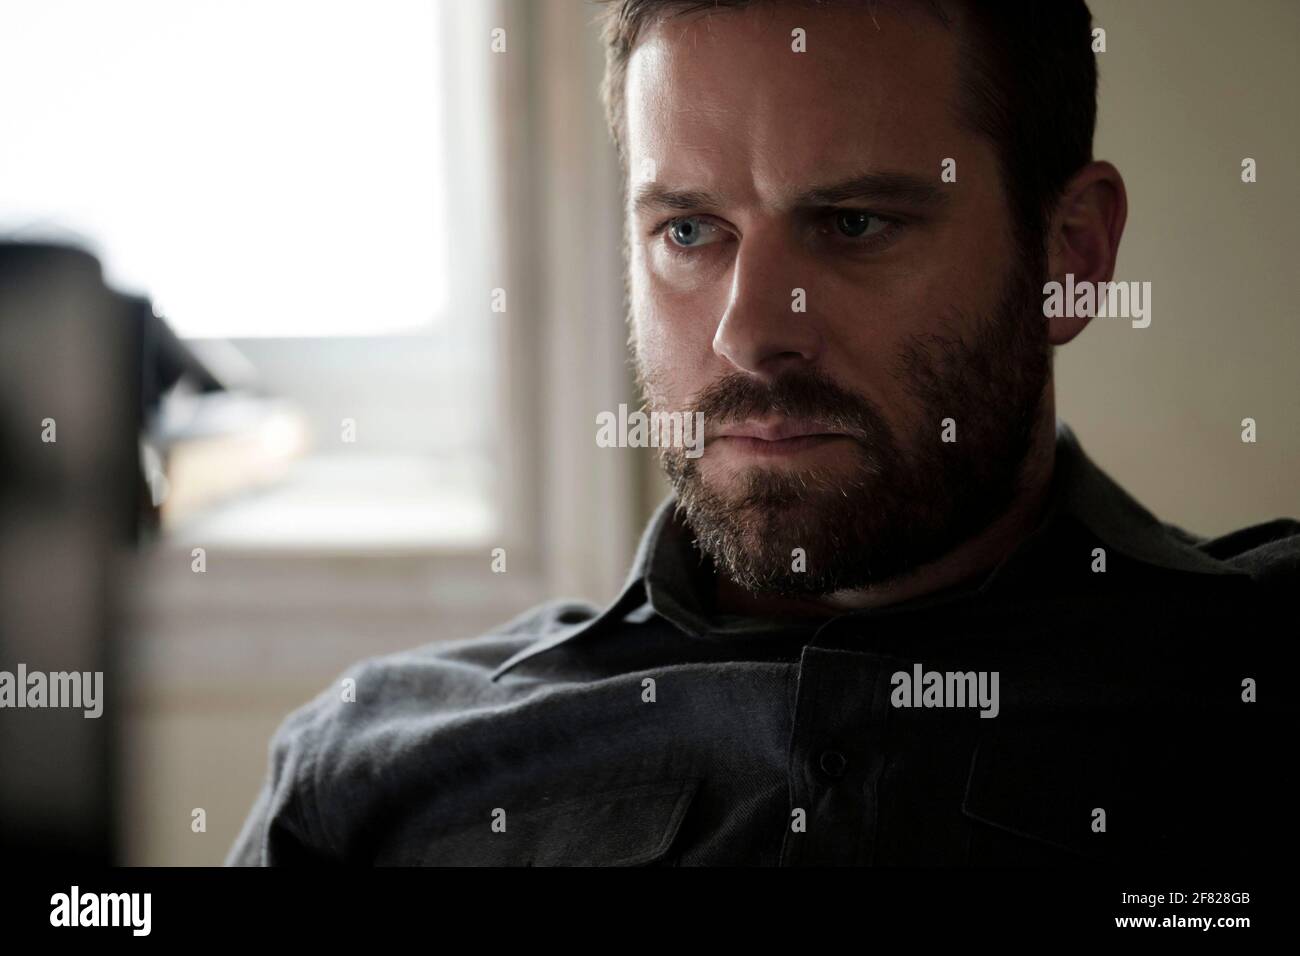 ARMIE HAMMER in CRISIS (2021), directed by NICHOLAS JARECKI. Credit: Les  Productions LOD / Album Stock Photo - Alamy